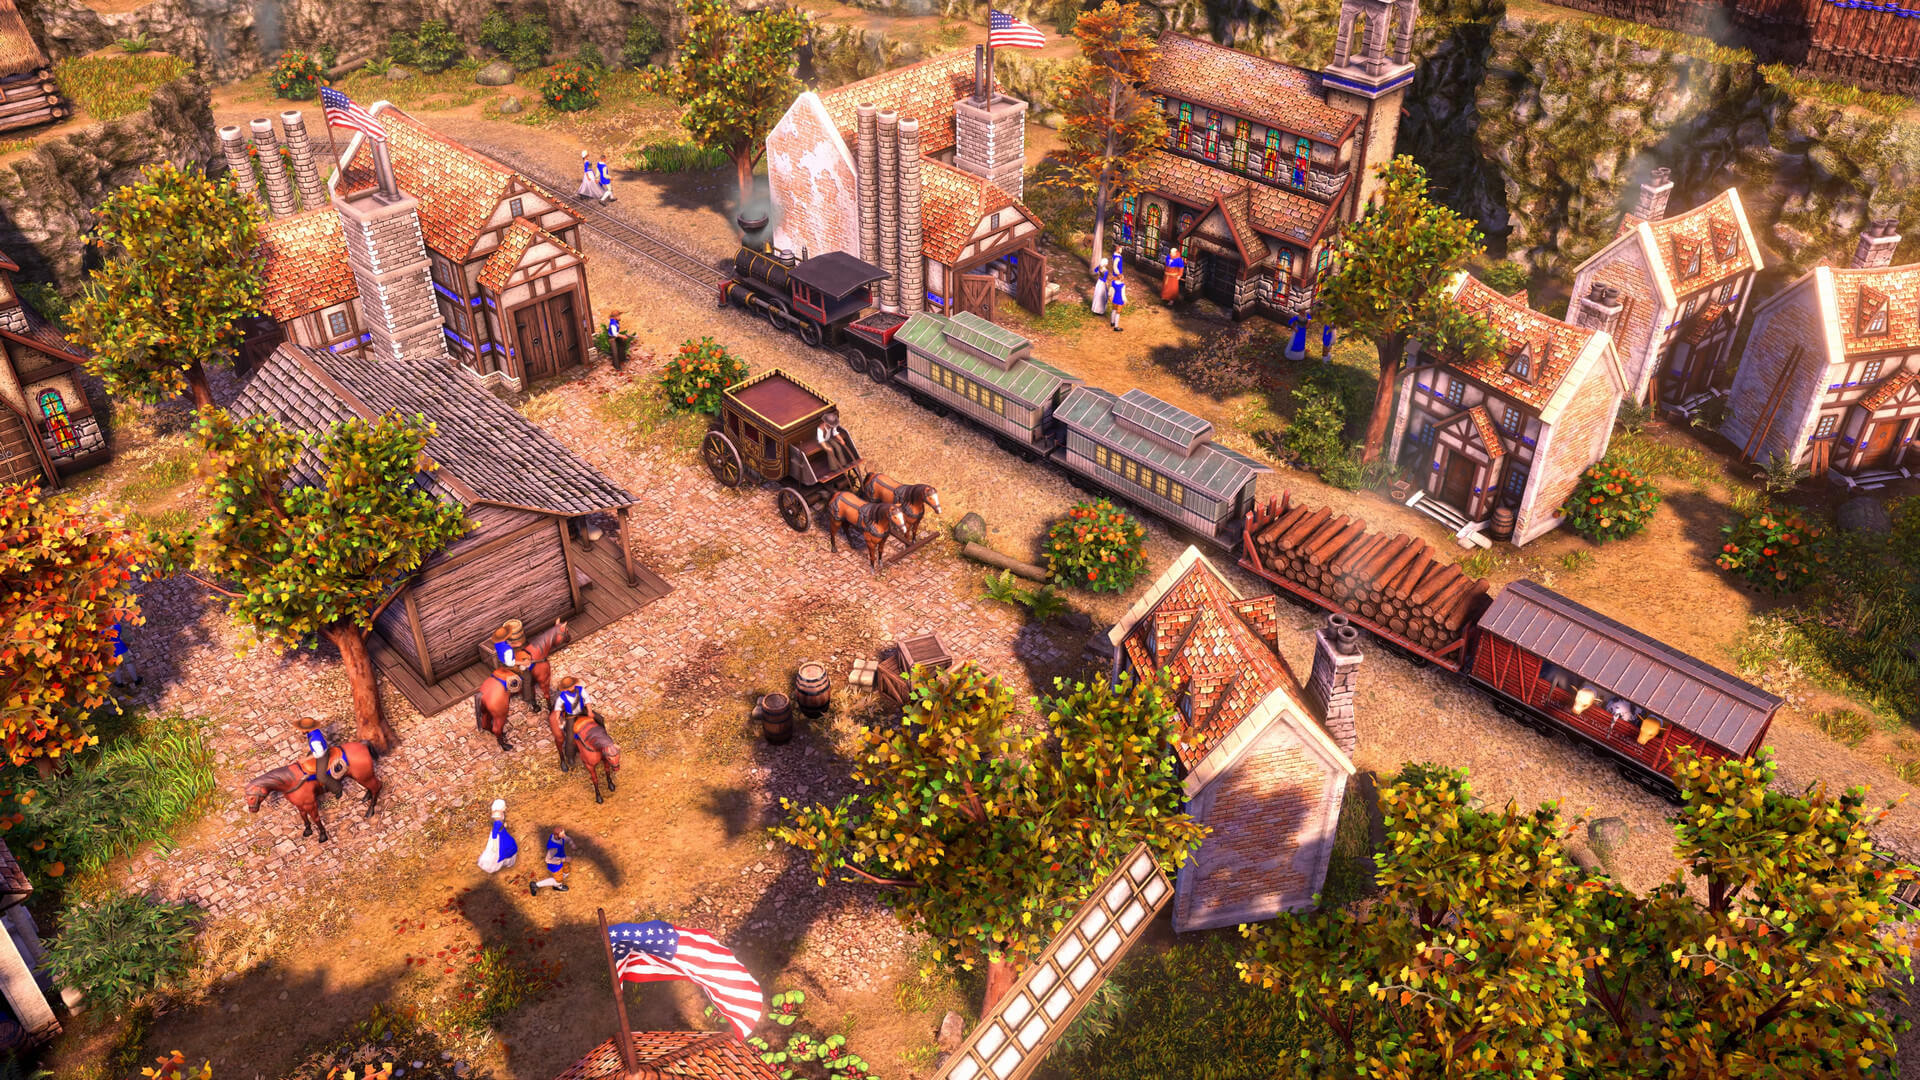 Age of Empires 3: Definitive Edition releases on October 15th, PC